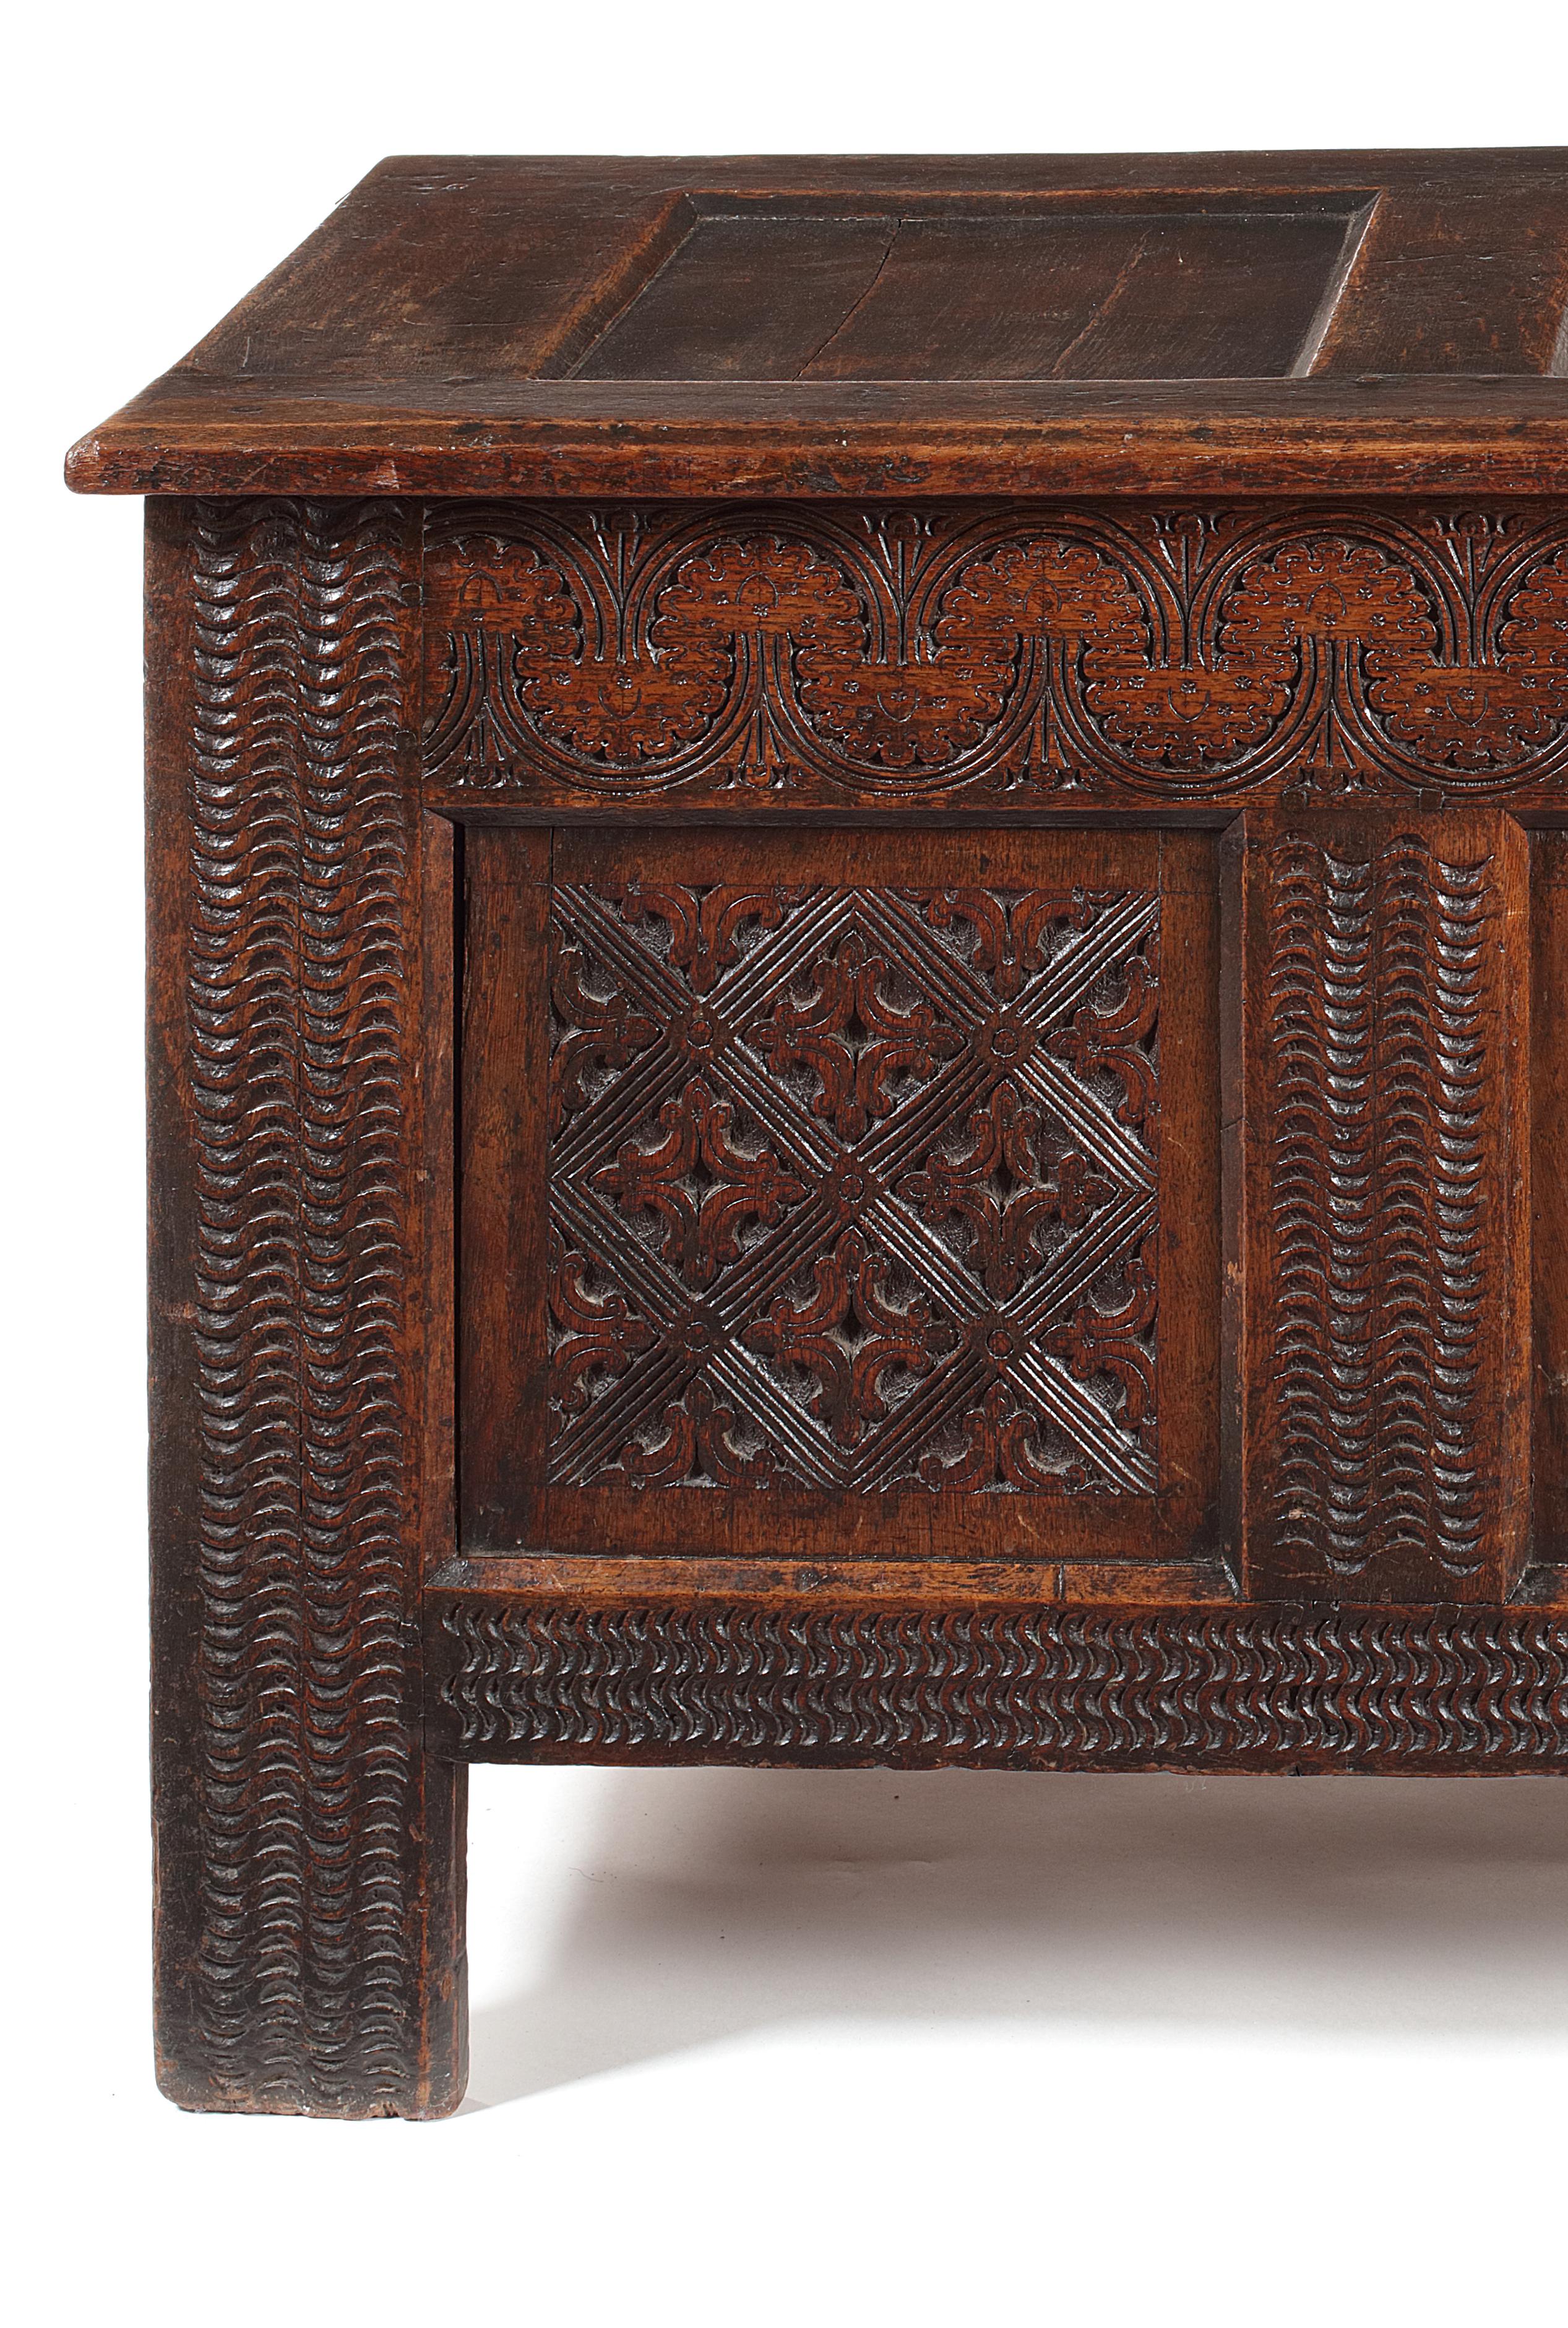 The three-panel lid above a profusely carved three-panel front with low relief interlocking foliate motif to the frieze, each panel with a lattice design flanked by uprights and stiles with wavy gouge-carved detail. Measures: 131cm wide, 51cm deep,